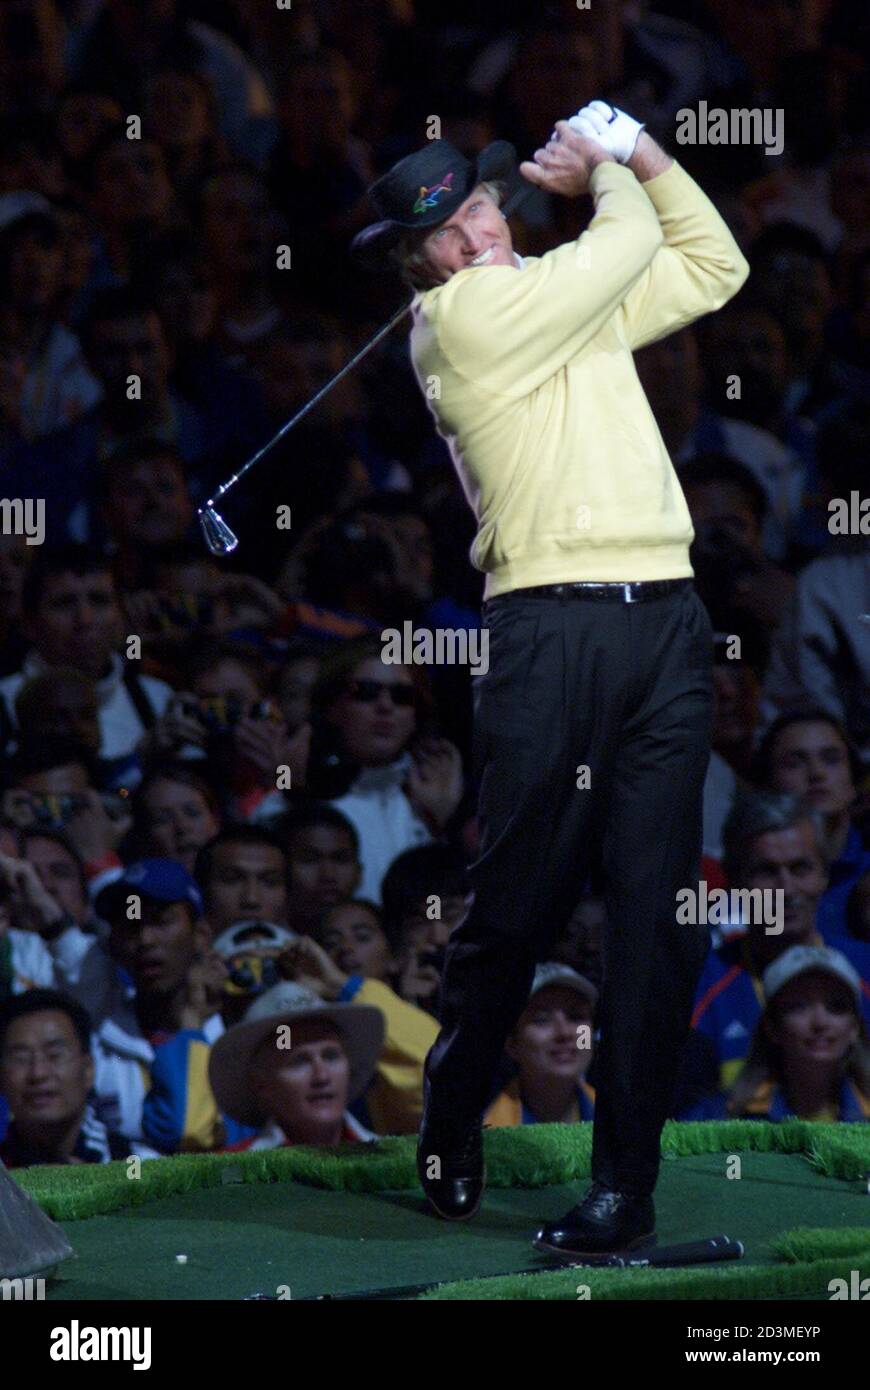 Australian golfer Greg Norman performs during the closing ceremonies of the Olympic Games in Sydney on October 1, 2000 following 16 days of competition. next games are scheduled to be held